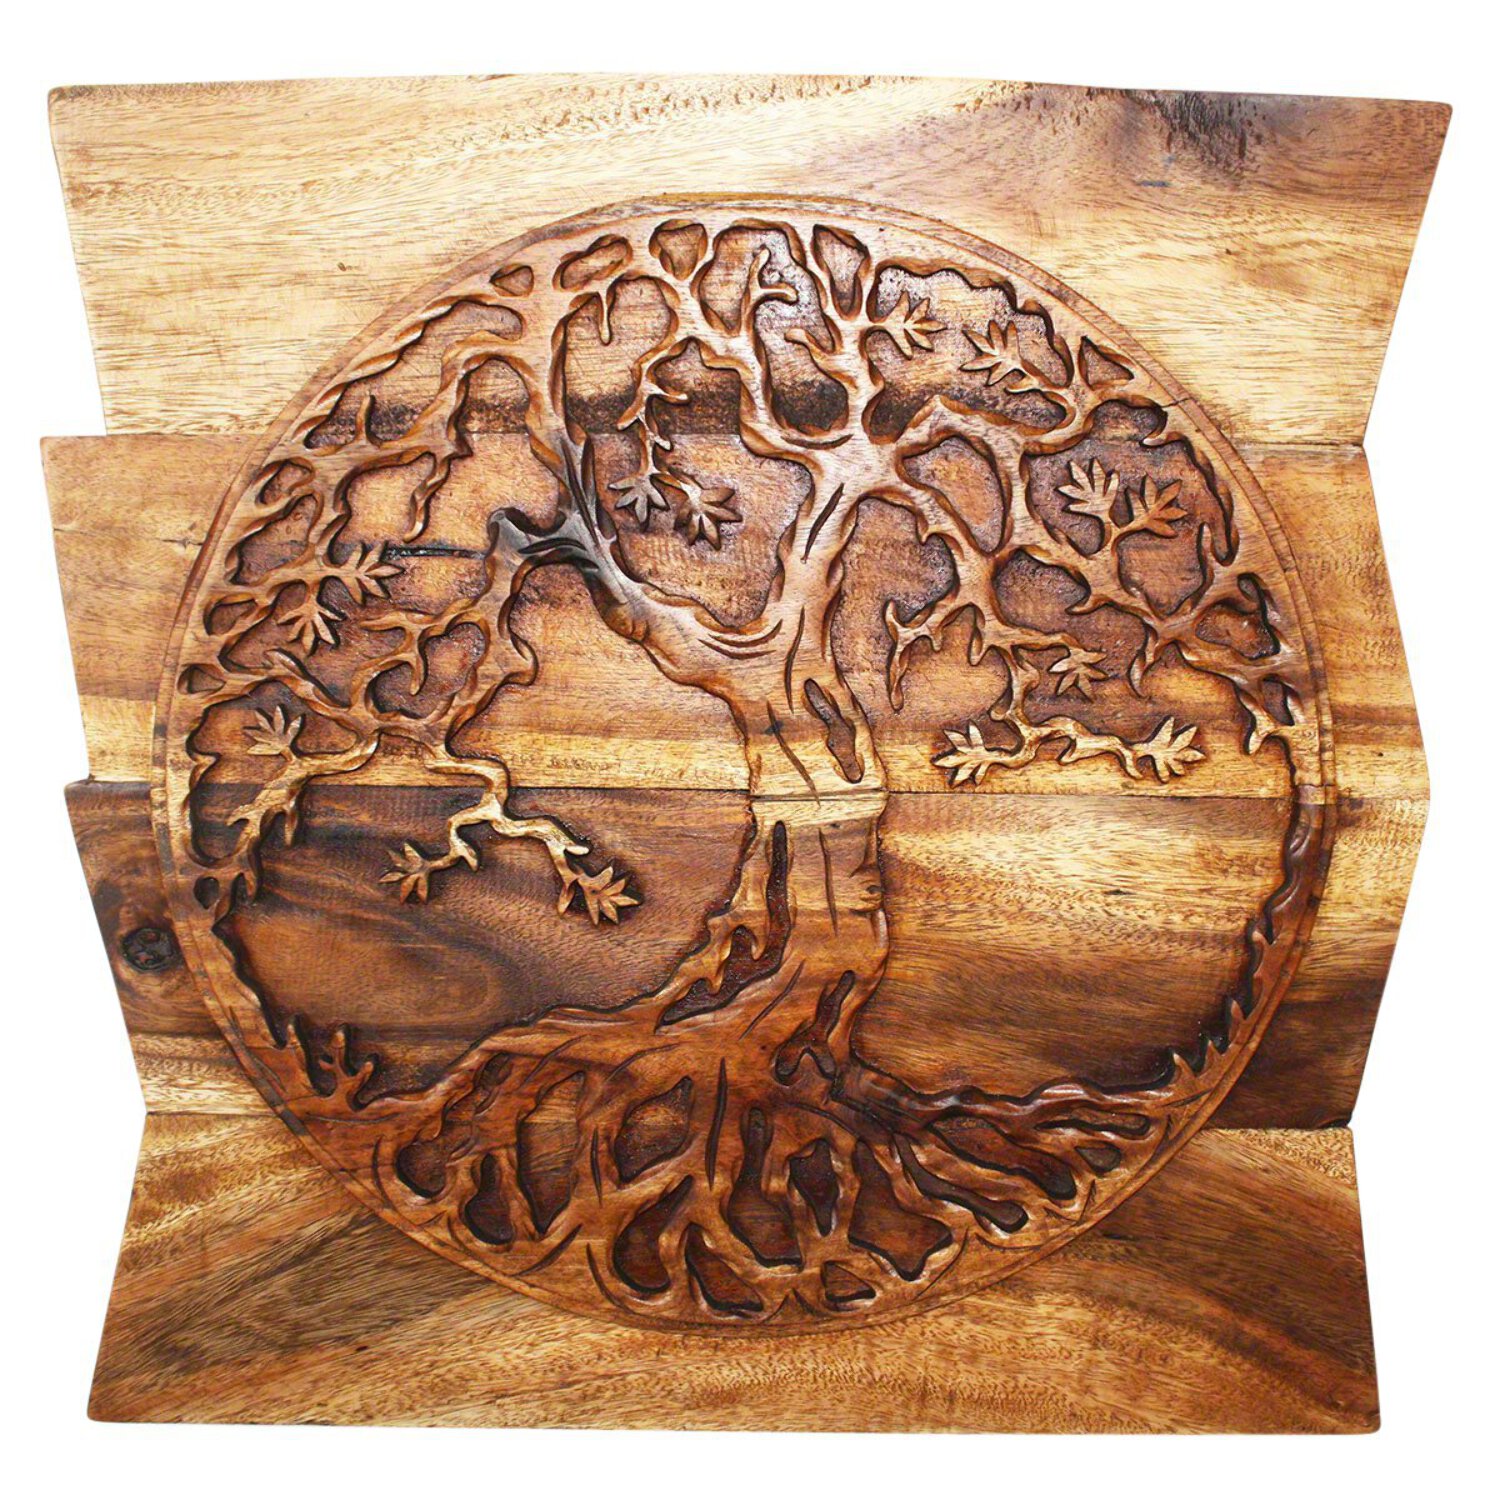 Haussmann® Wood Tree of Life Round on Uneven Boards 24 x 24 in Walnut - image 2 of 2